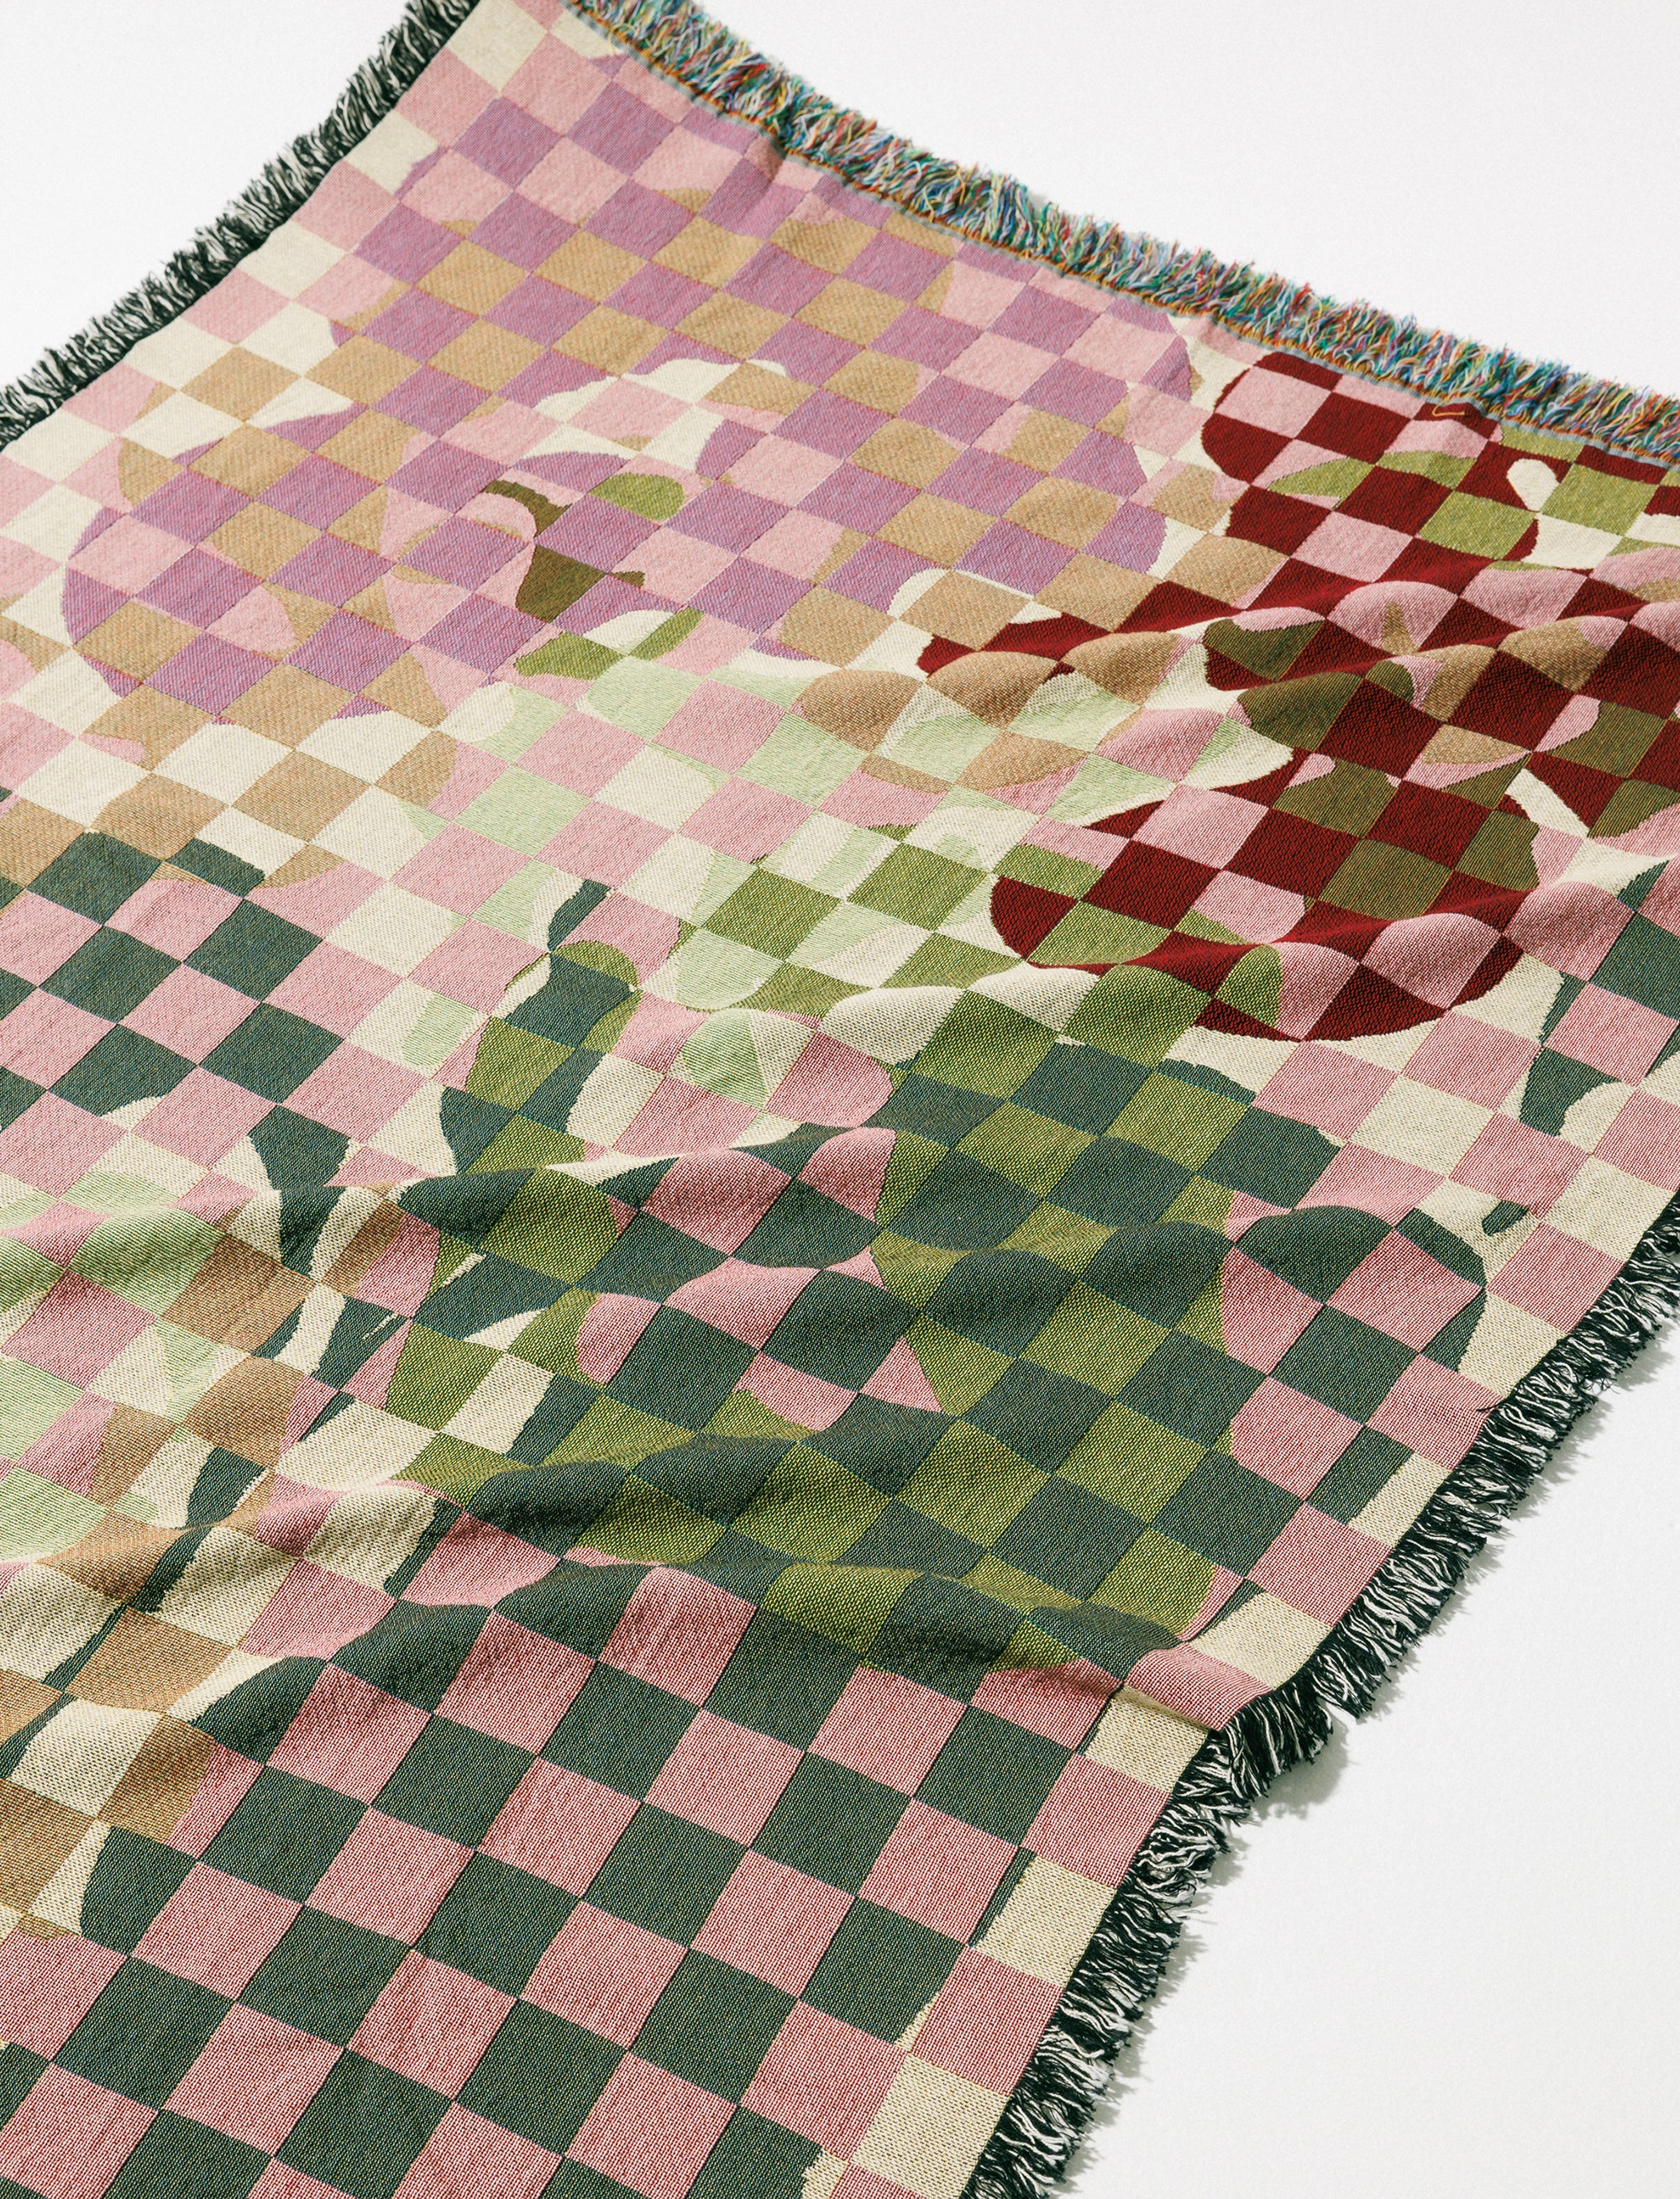 Woven throw blanket - Orchid camouflage